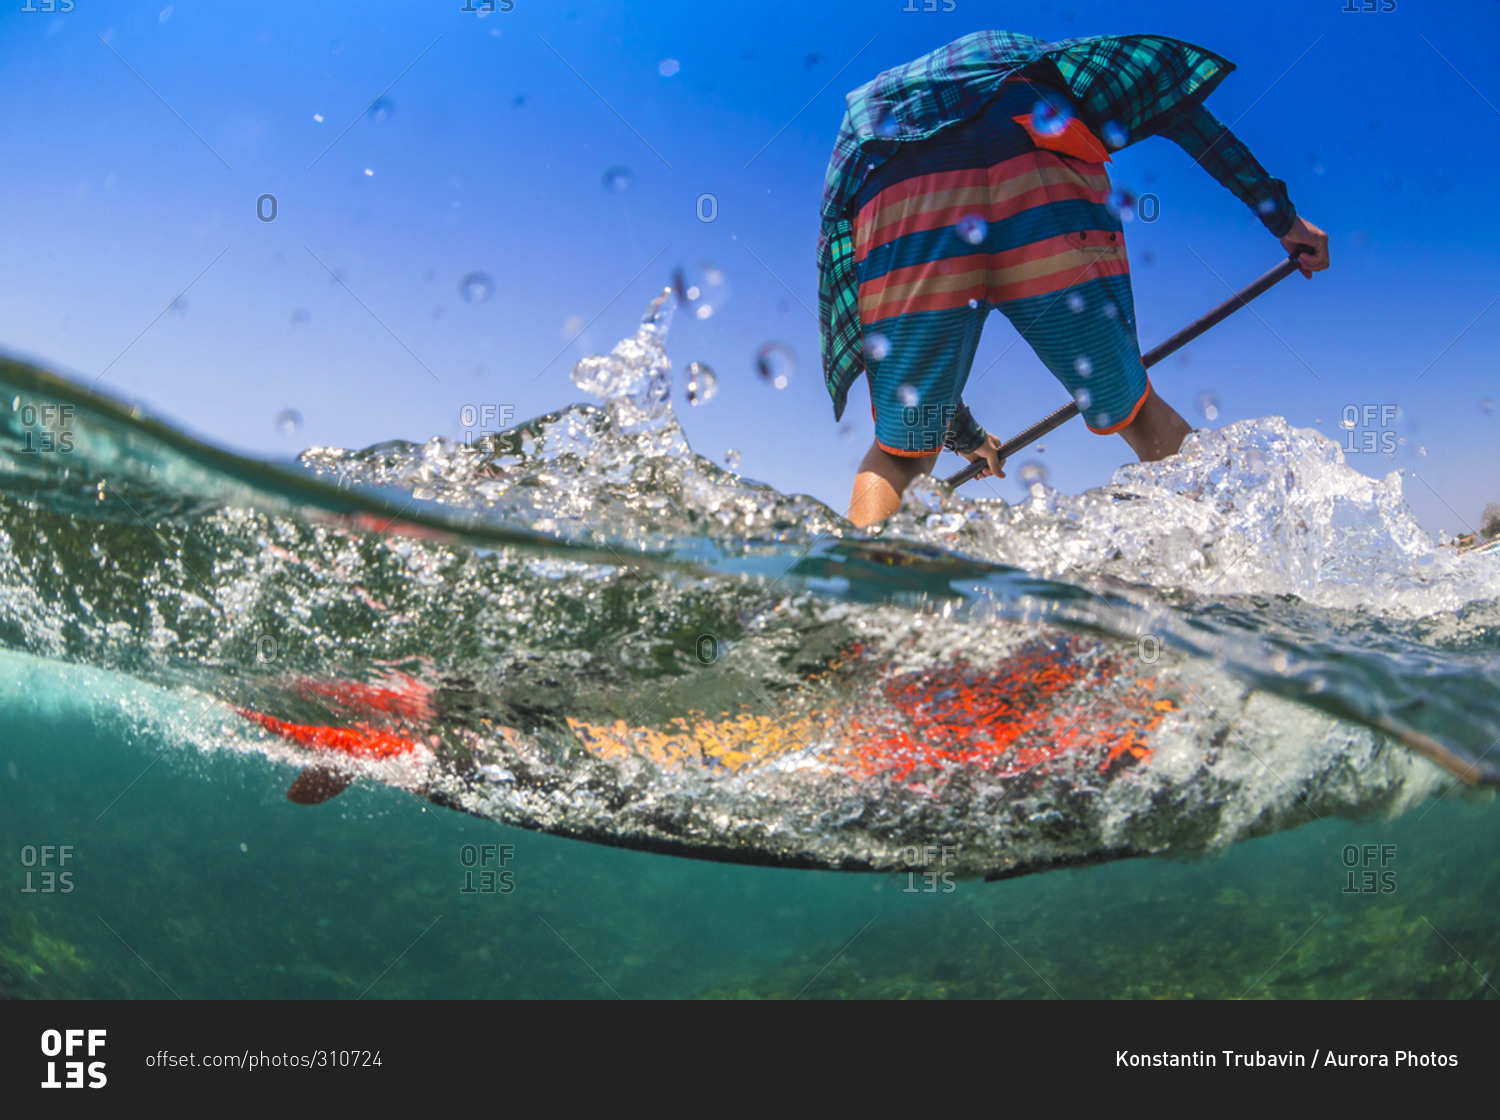 Low angle view of a Sup surfer in tropical water